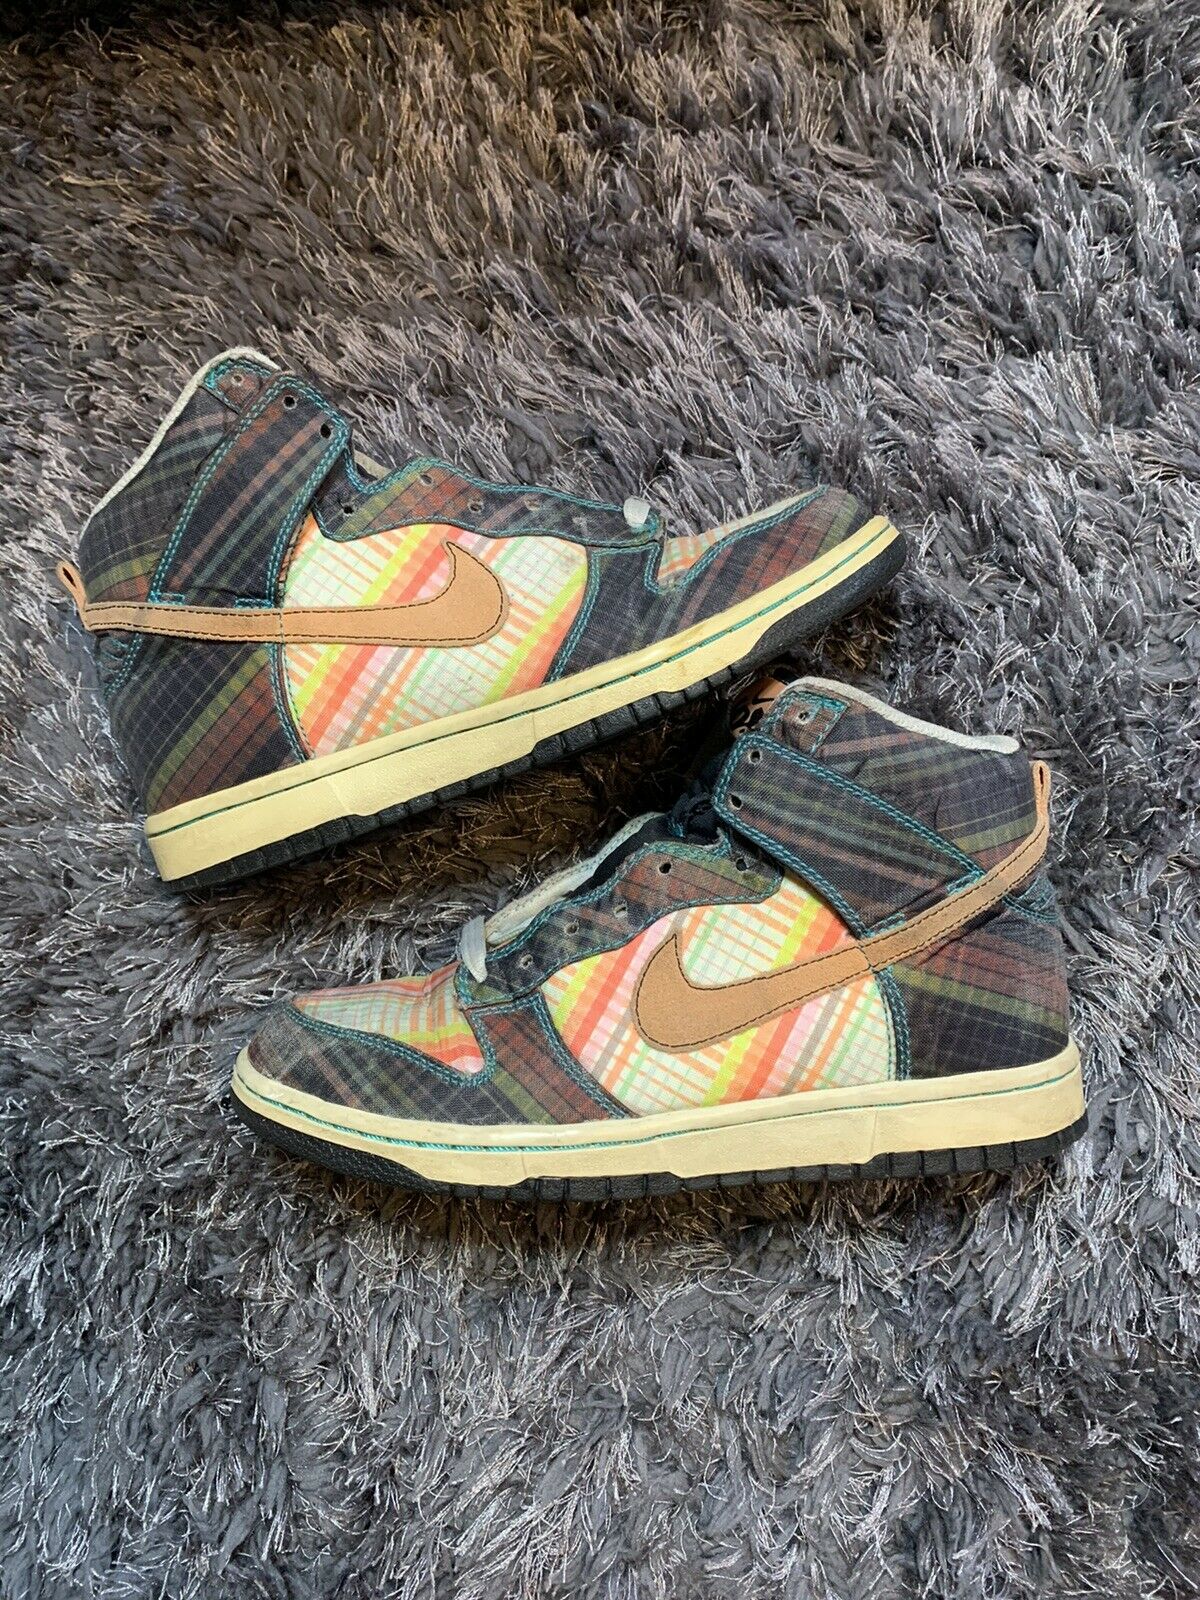 Nike Dunk High Top 6.0 Women's Plaid Sneaker Shoes 342257-400 Size 8M 6.5W Used